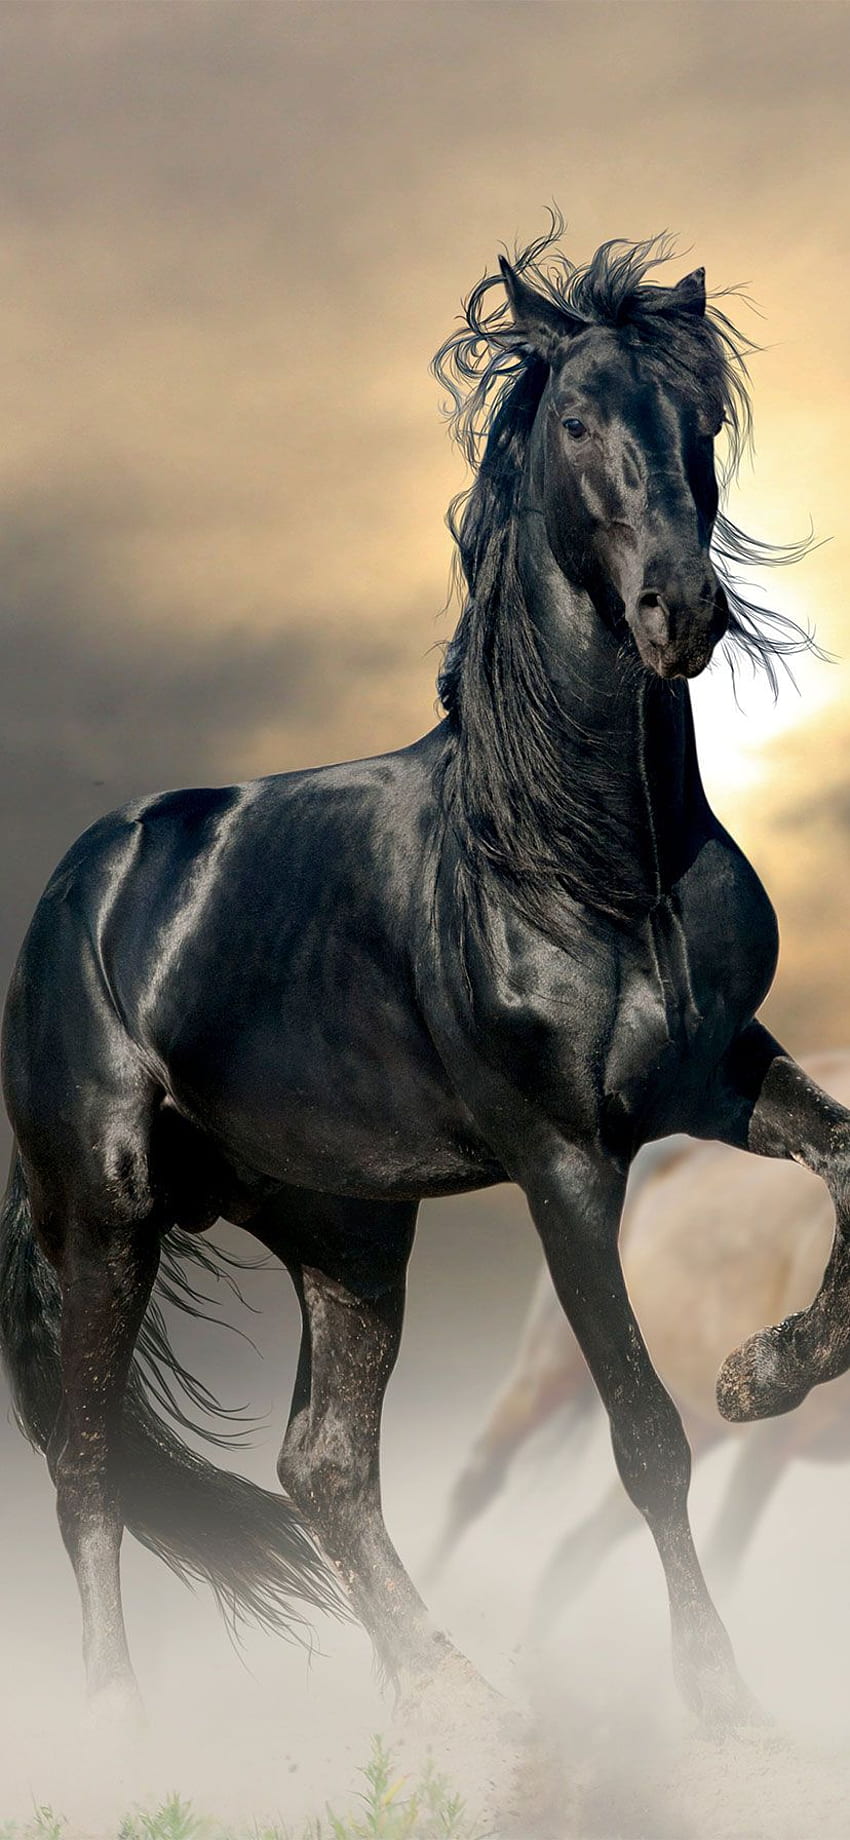 Update 86+ horse wallpaper for iphone - in.cdgdbentre